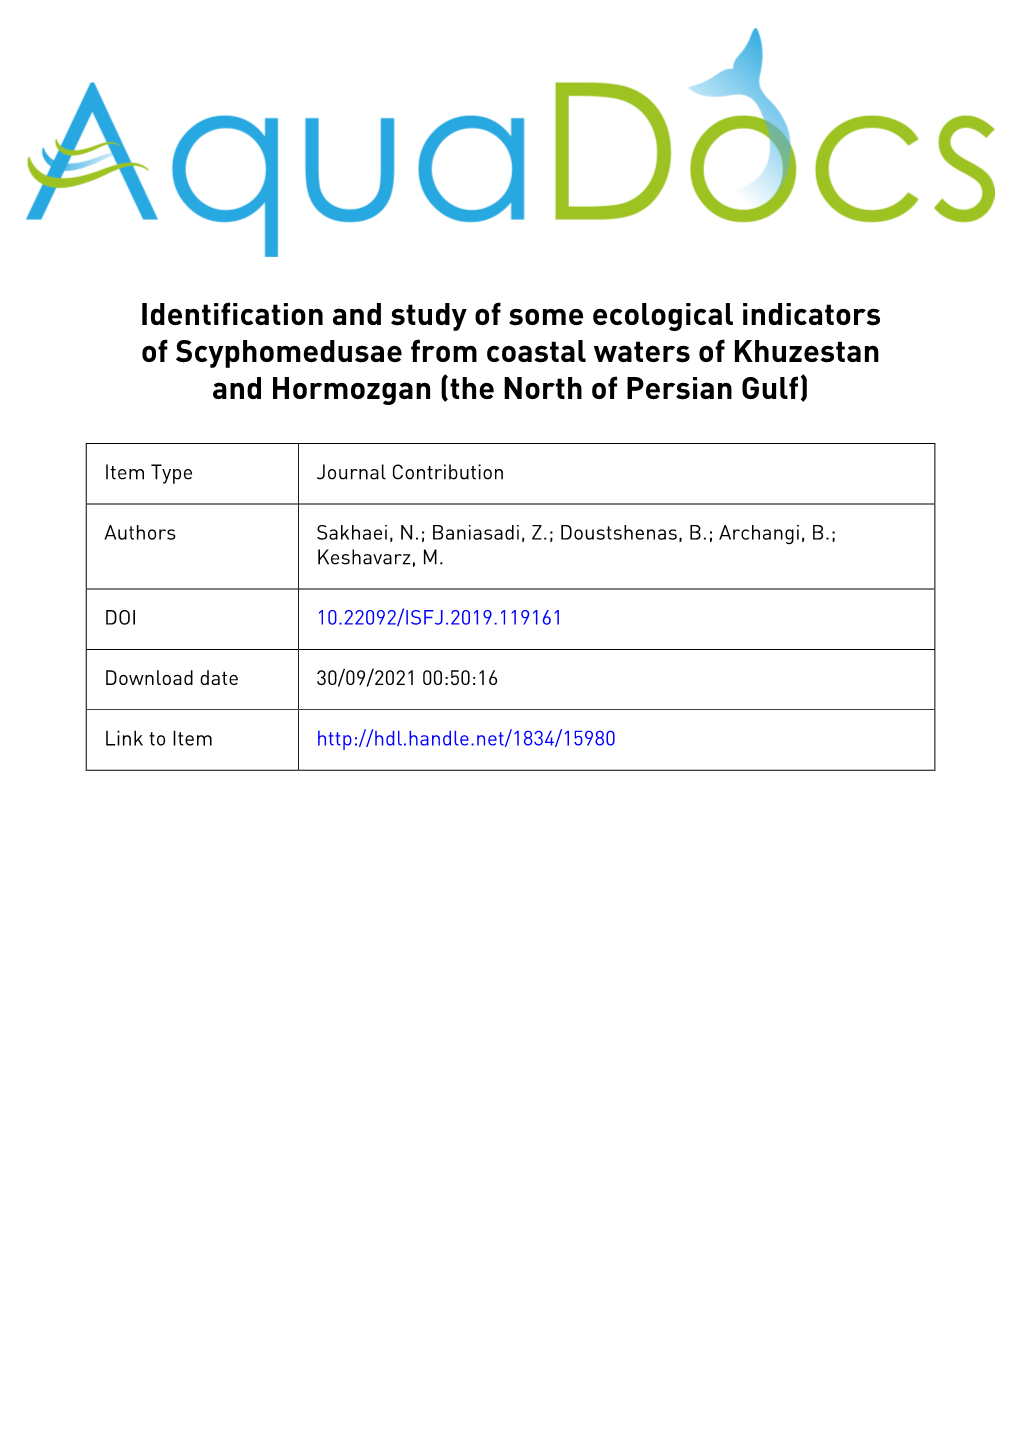 Identification and Study of Some Ecological Indicators of Scyphomedusae from Coastal Waters of Khuzestan and Hormozgan (The North of Persian Gulf)